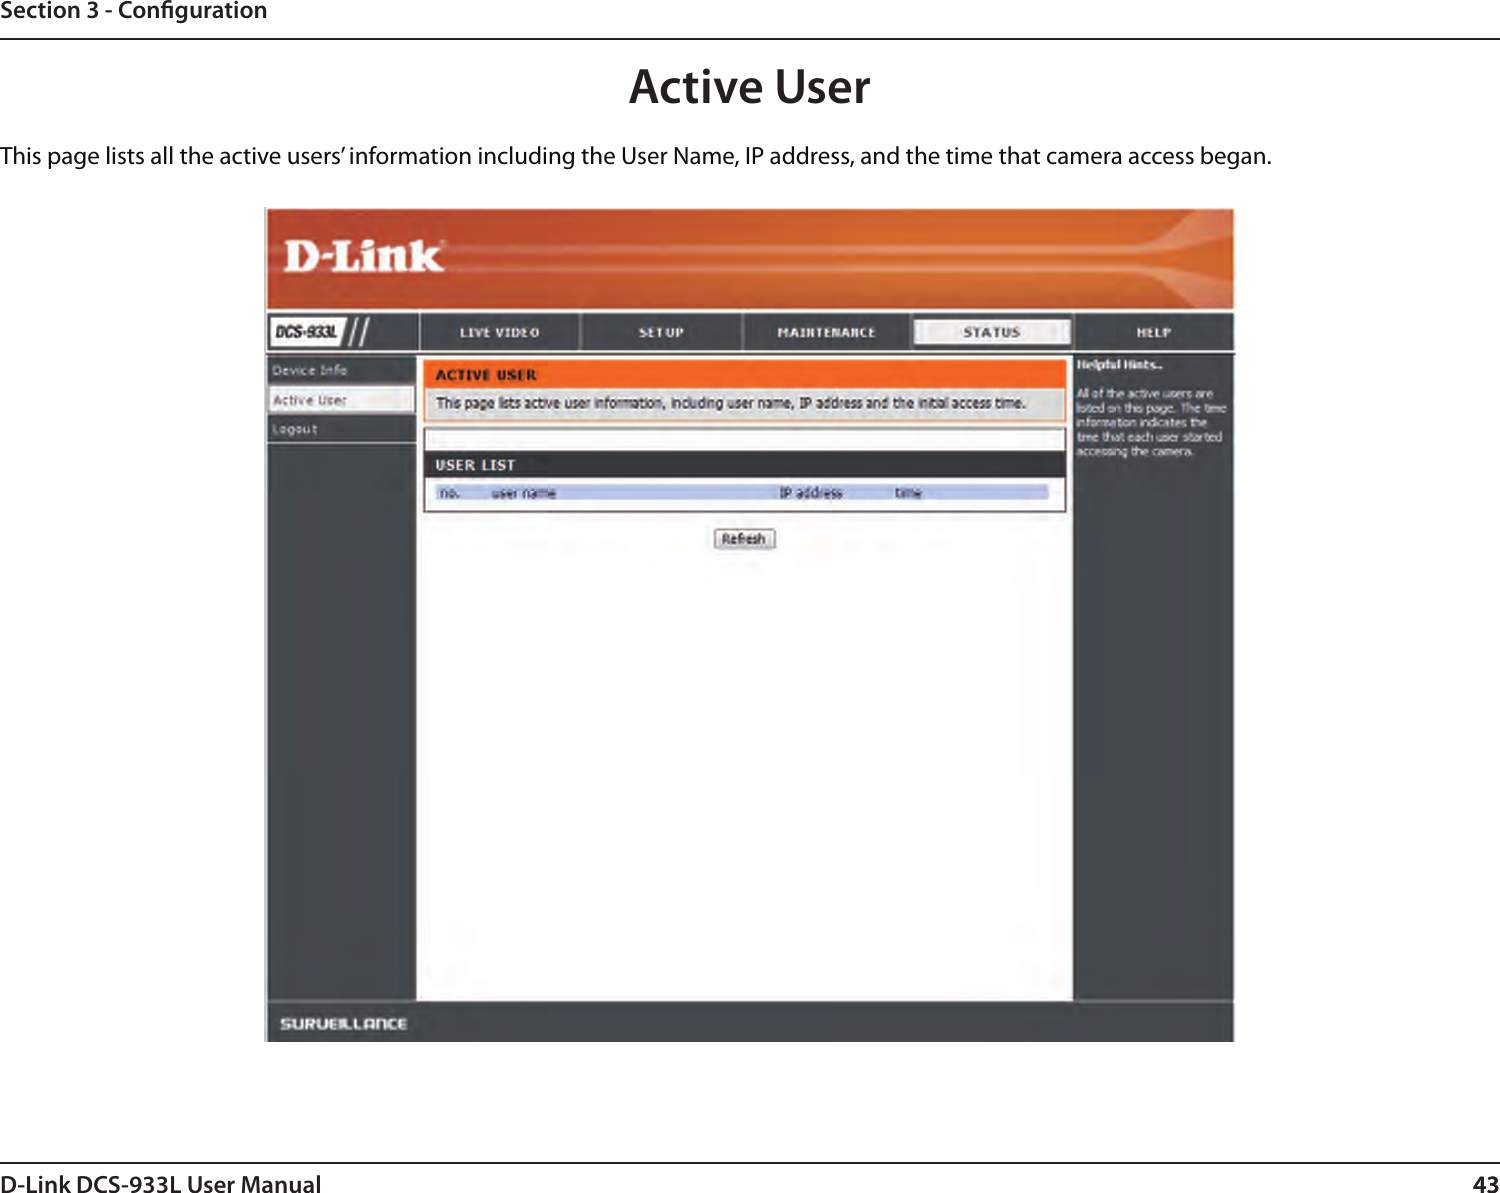 43D-Link DCS-933L User Manual 43Section 3 - CongurationActive UserThis page lists all the active users’ information including the User Name, IP address, and the time that camera access began.